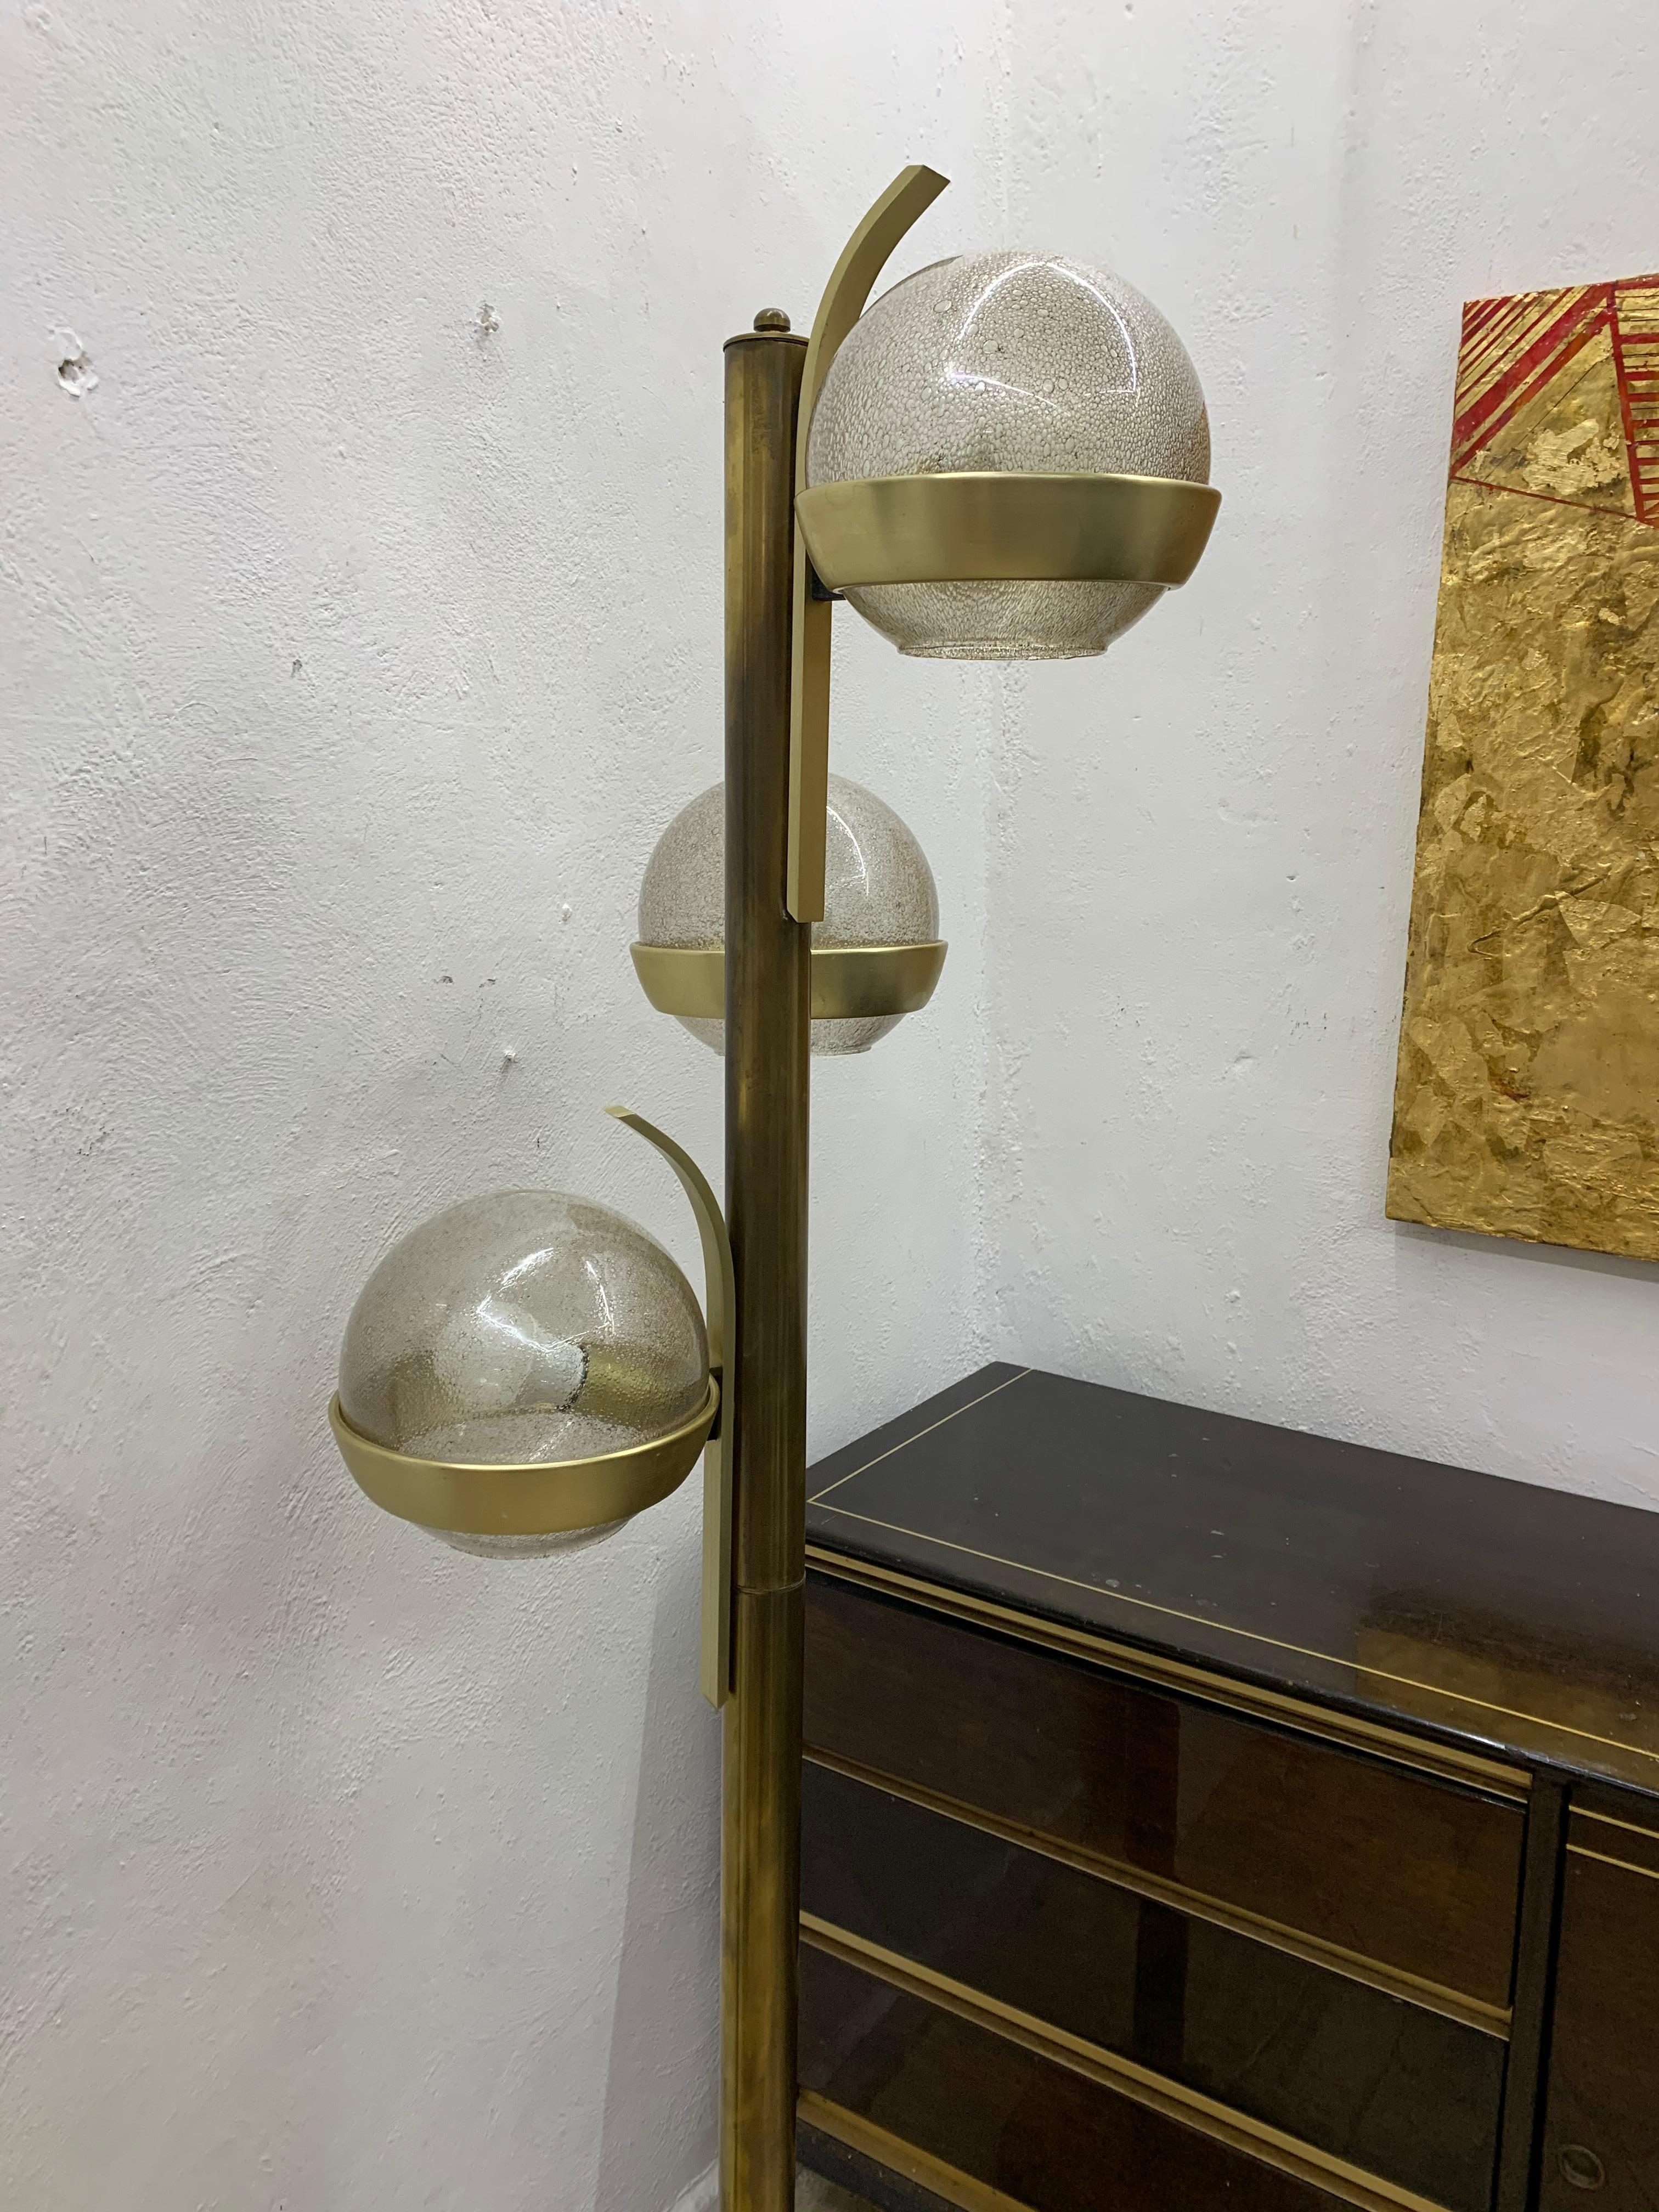 Space Age Floor Lamp by Lumi in Brass and Murano Glass, circa 1960s For Sale 1